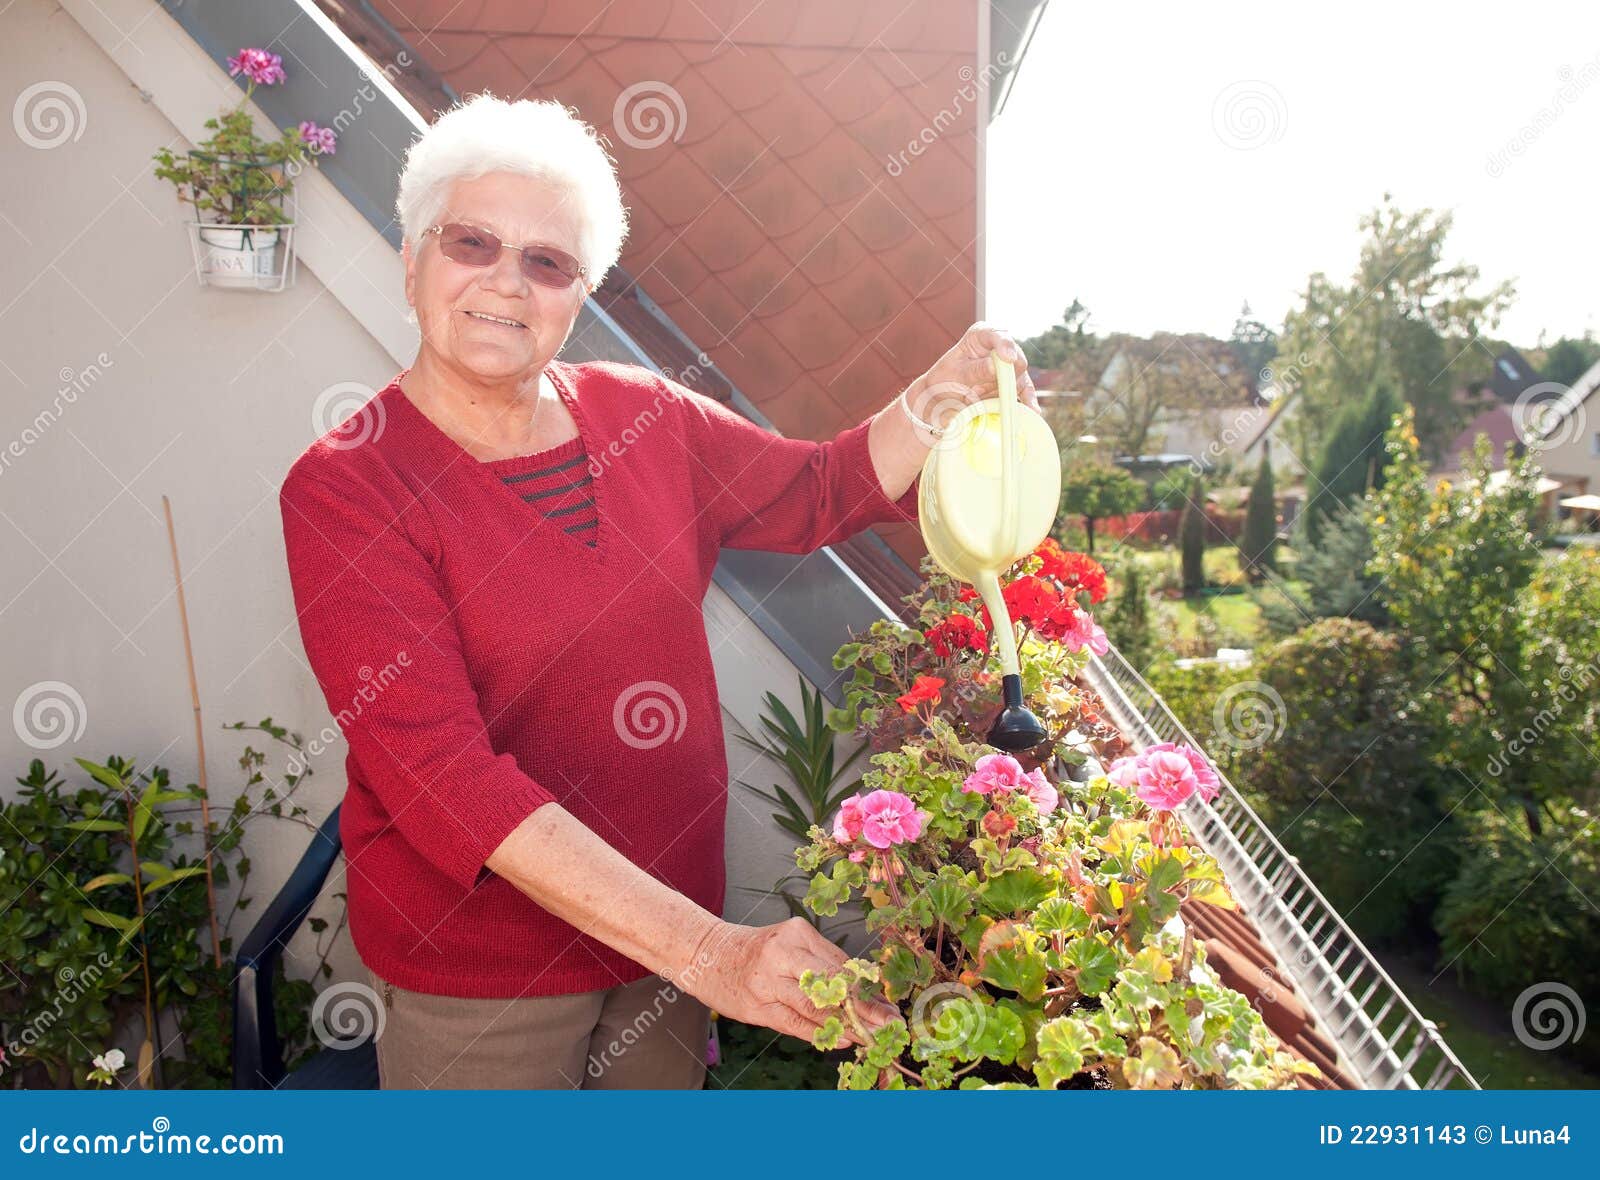 Watered Granny